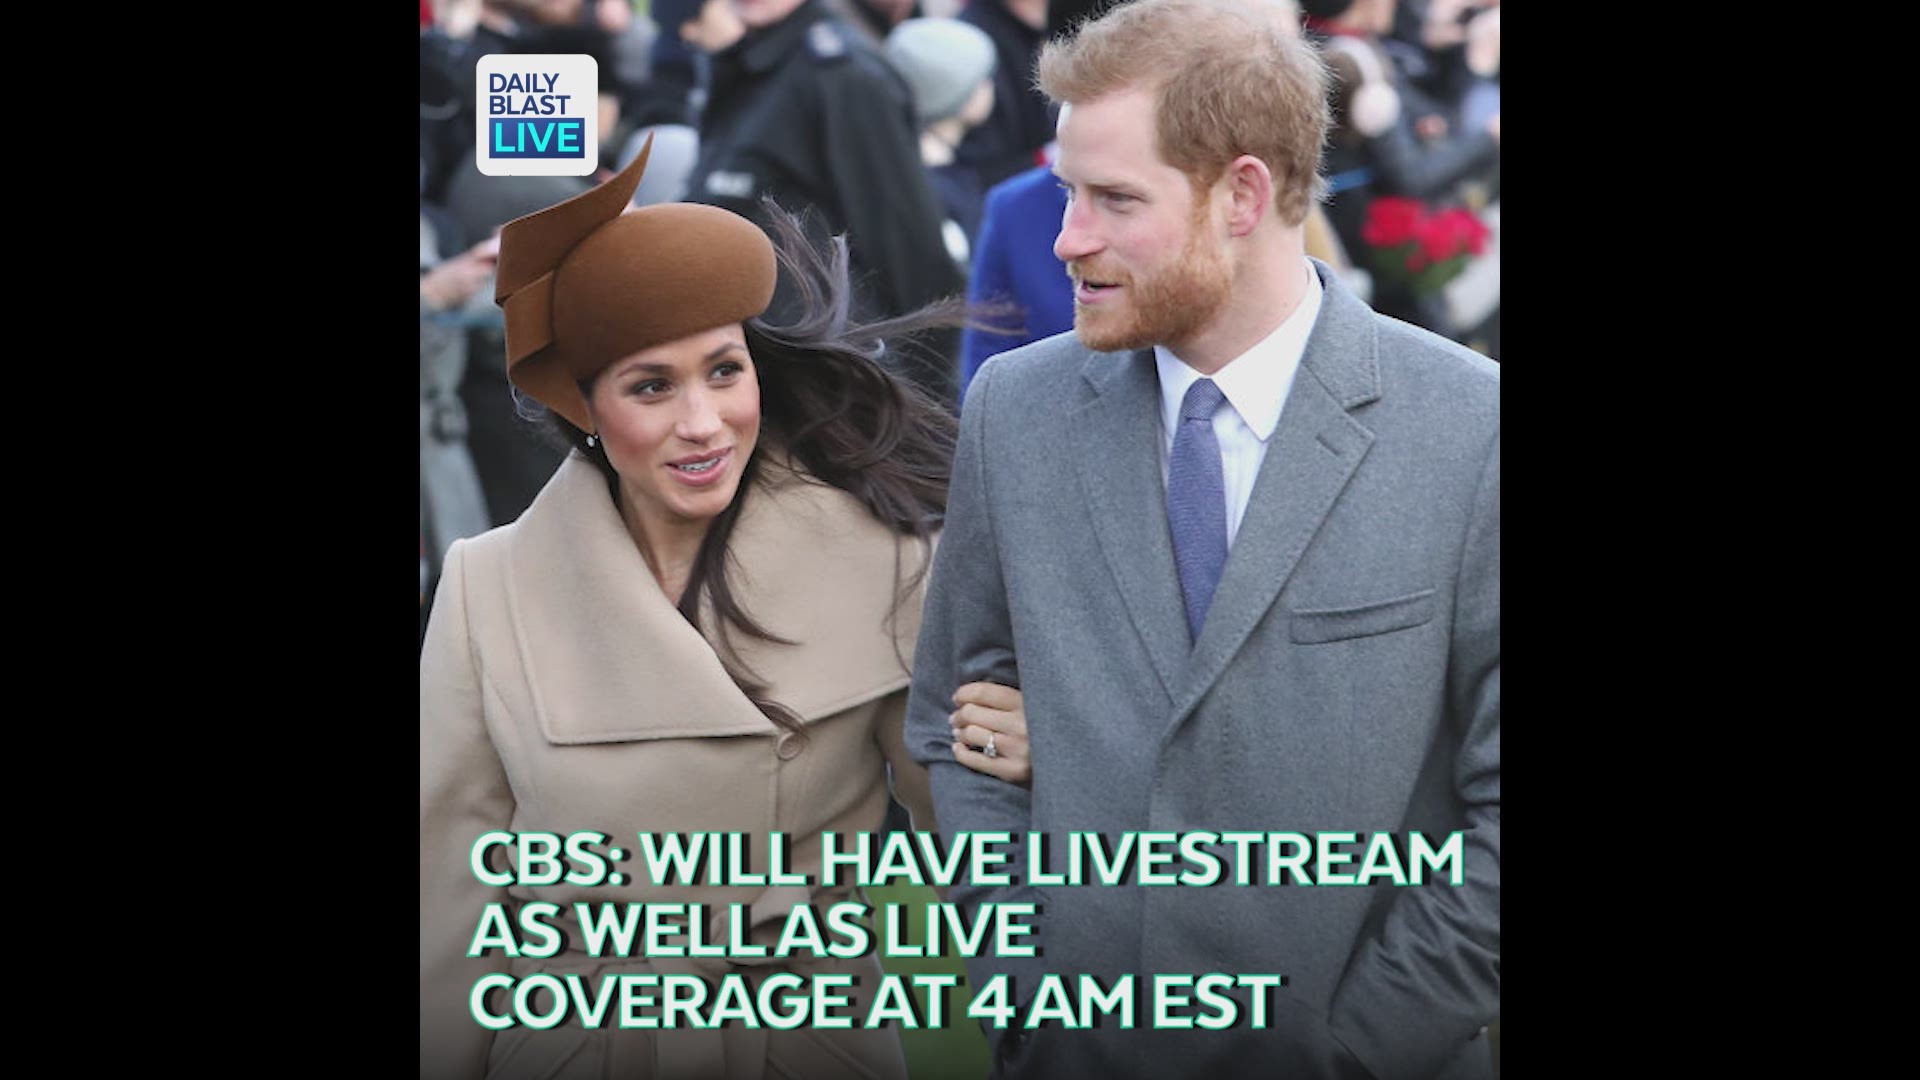 Here's how to watch the Royal Wedding on Saturday, May 19th!